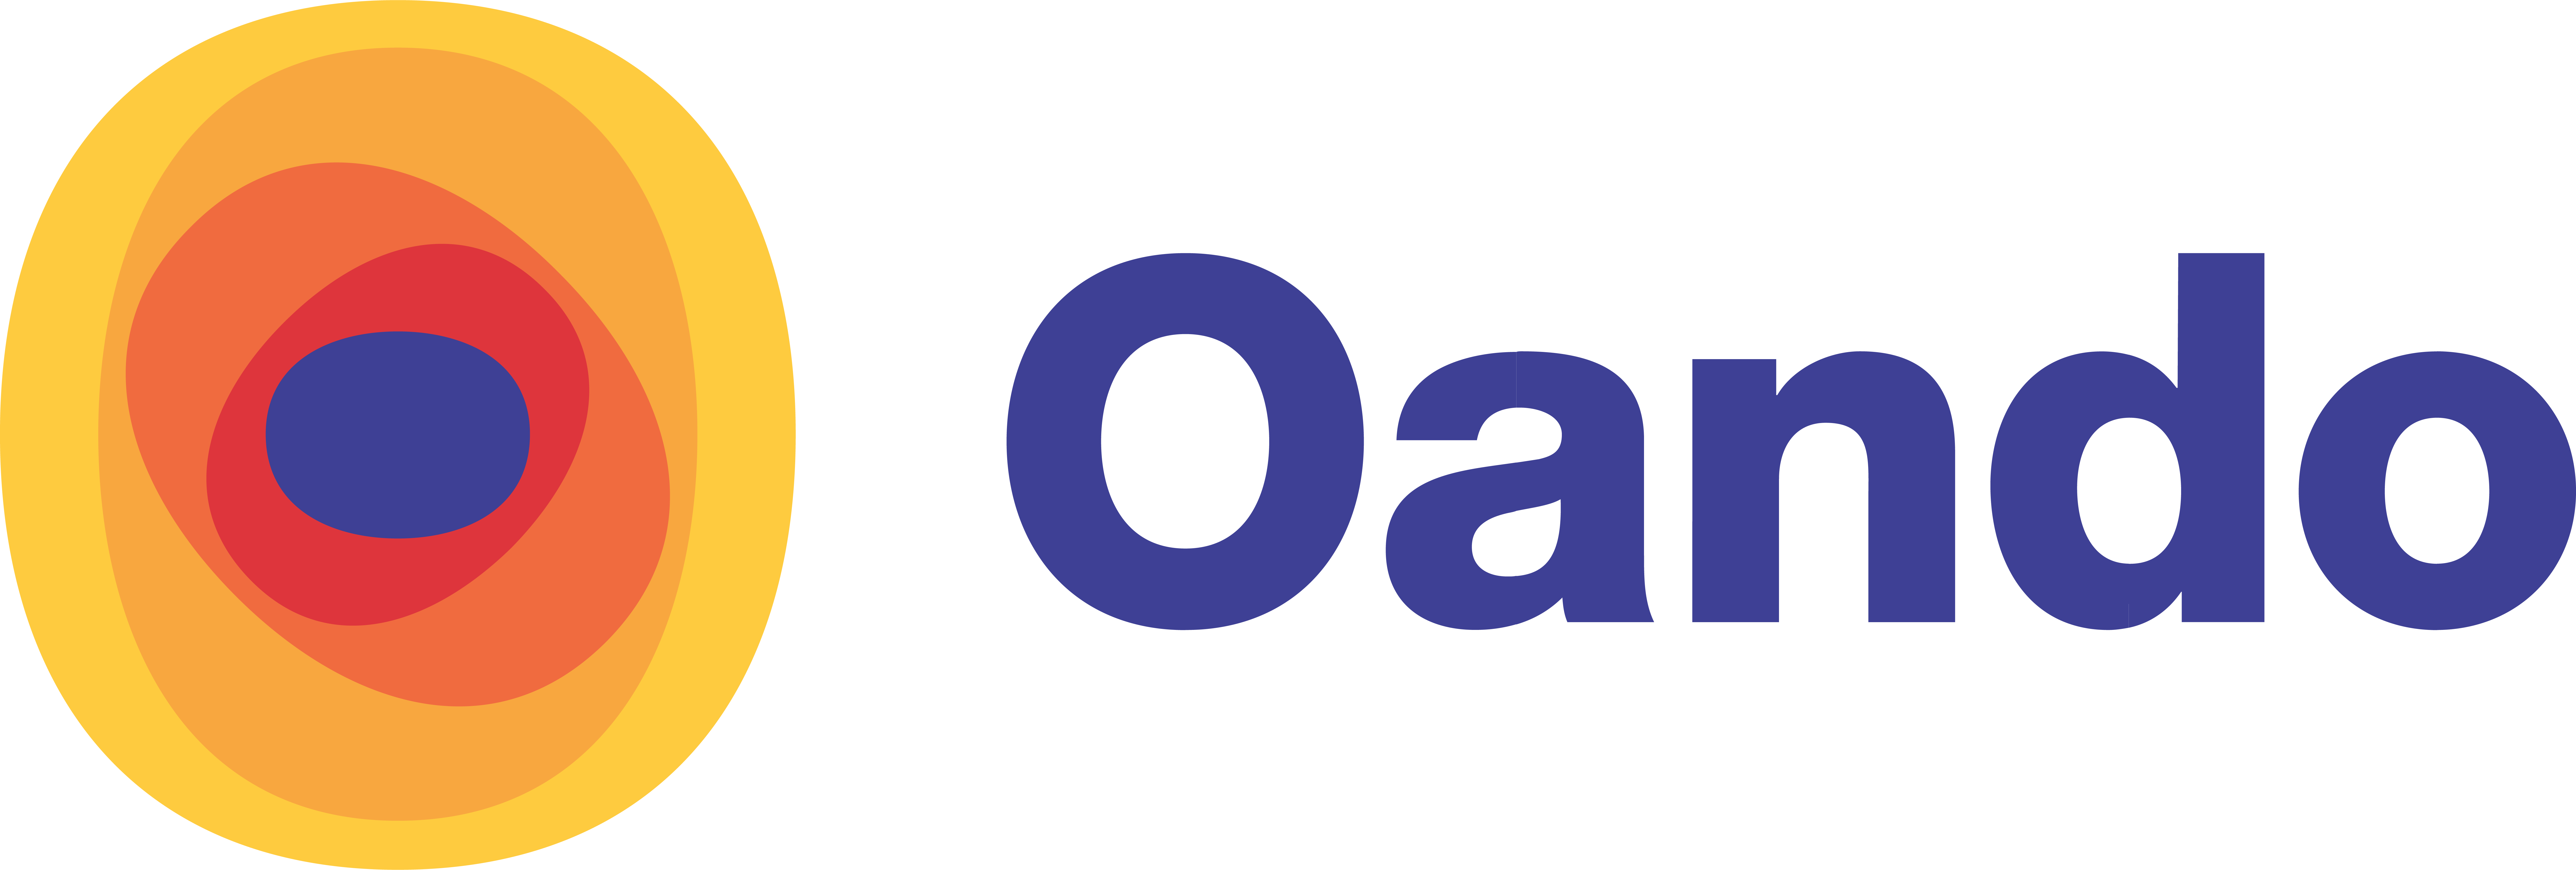 OANDO PLC ANNOUNCES FEDERAL HIGH COURT’S EXTENSION OF TIME TO FILE ITS SCHEME OF ARRANGEMENT DOCUMENT